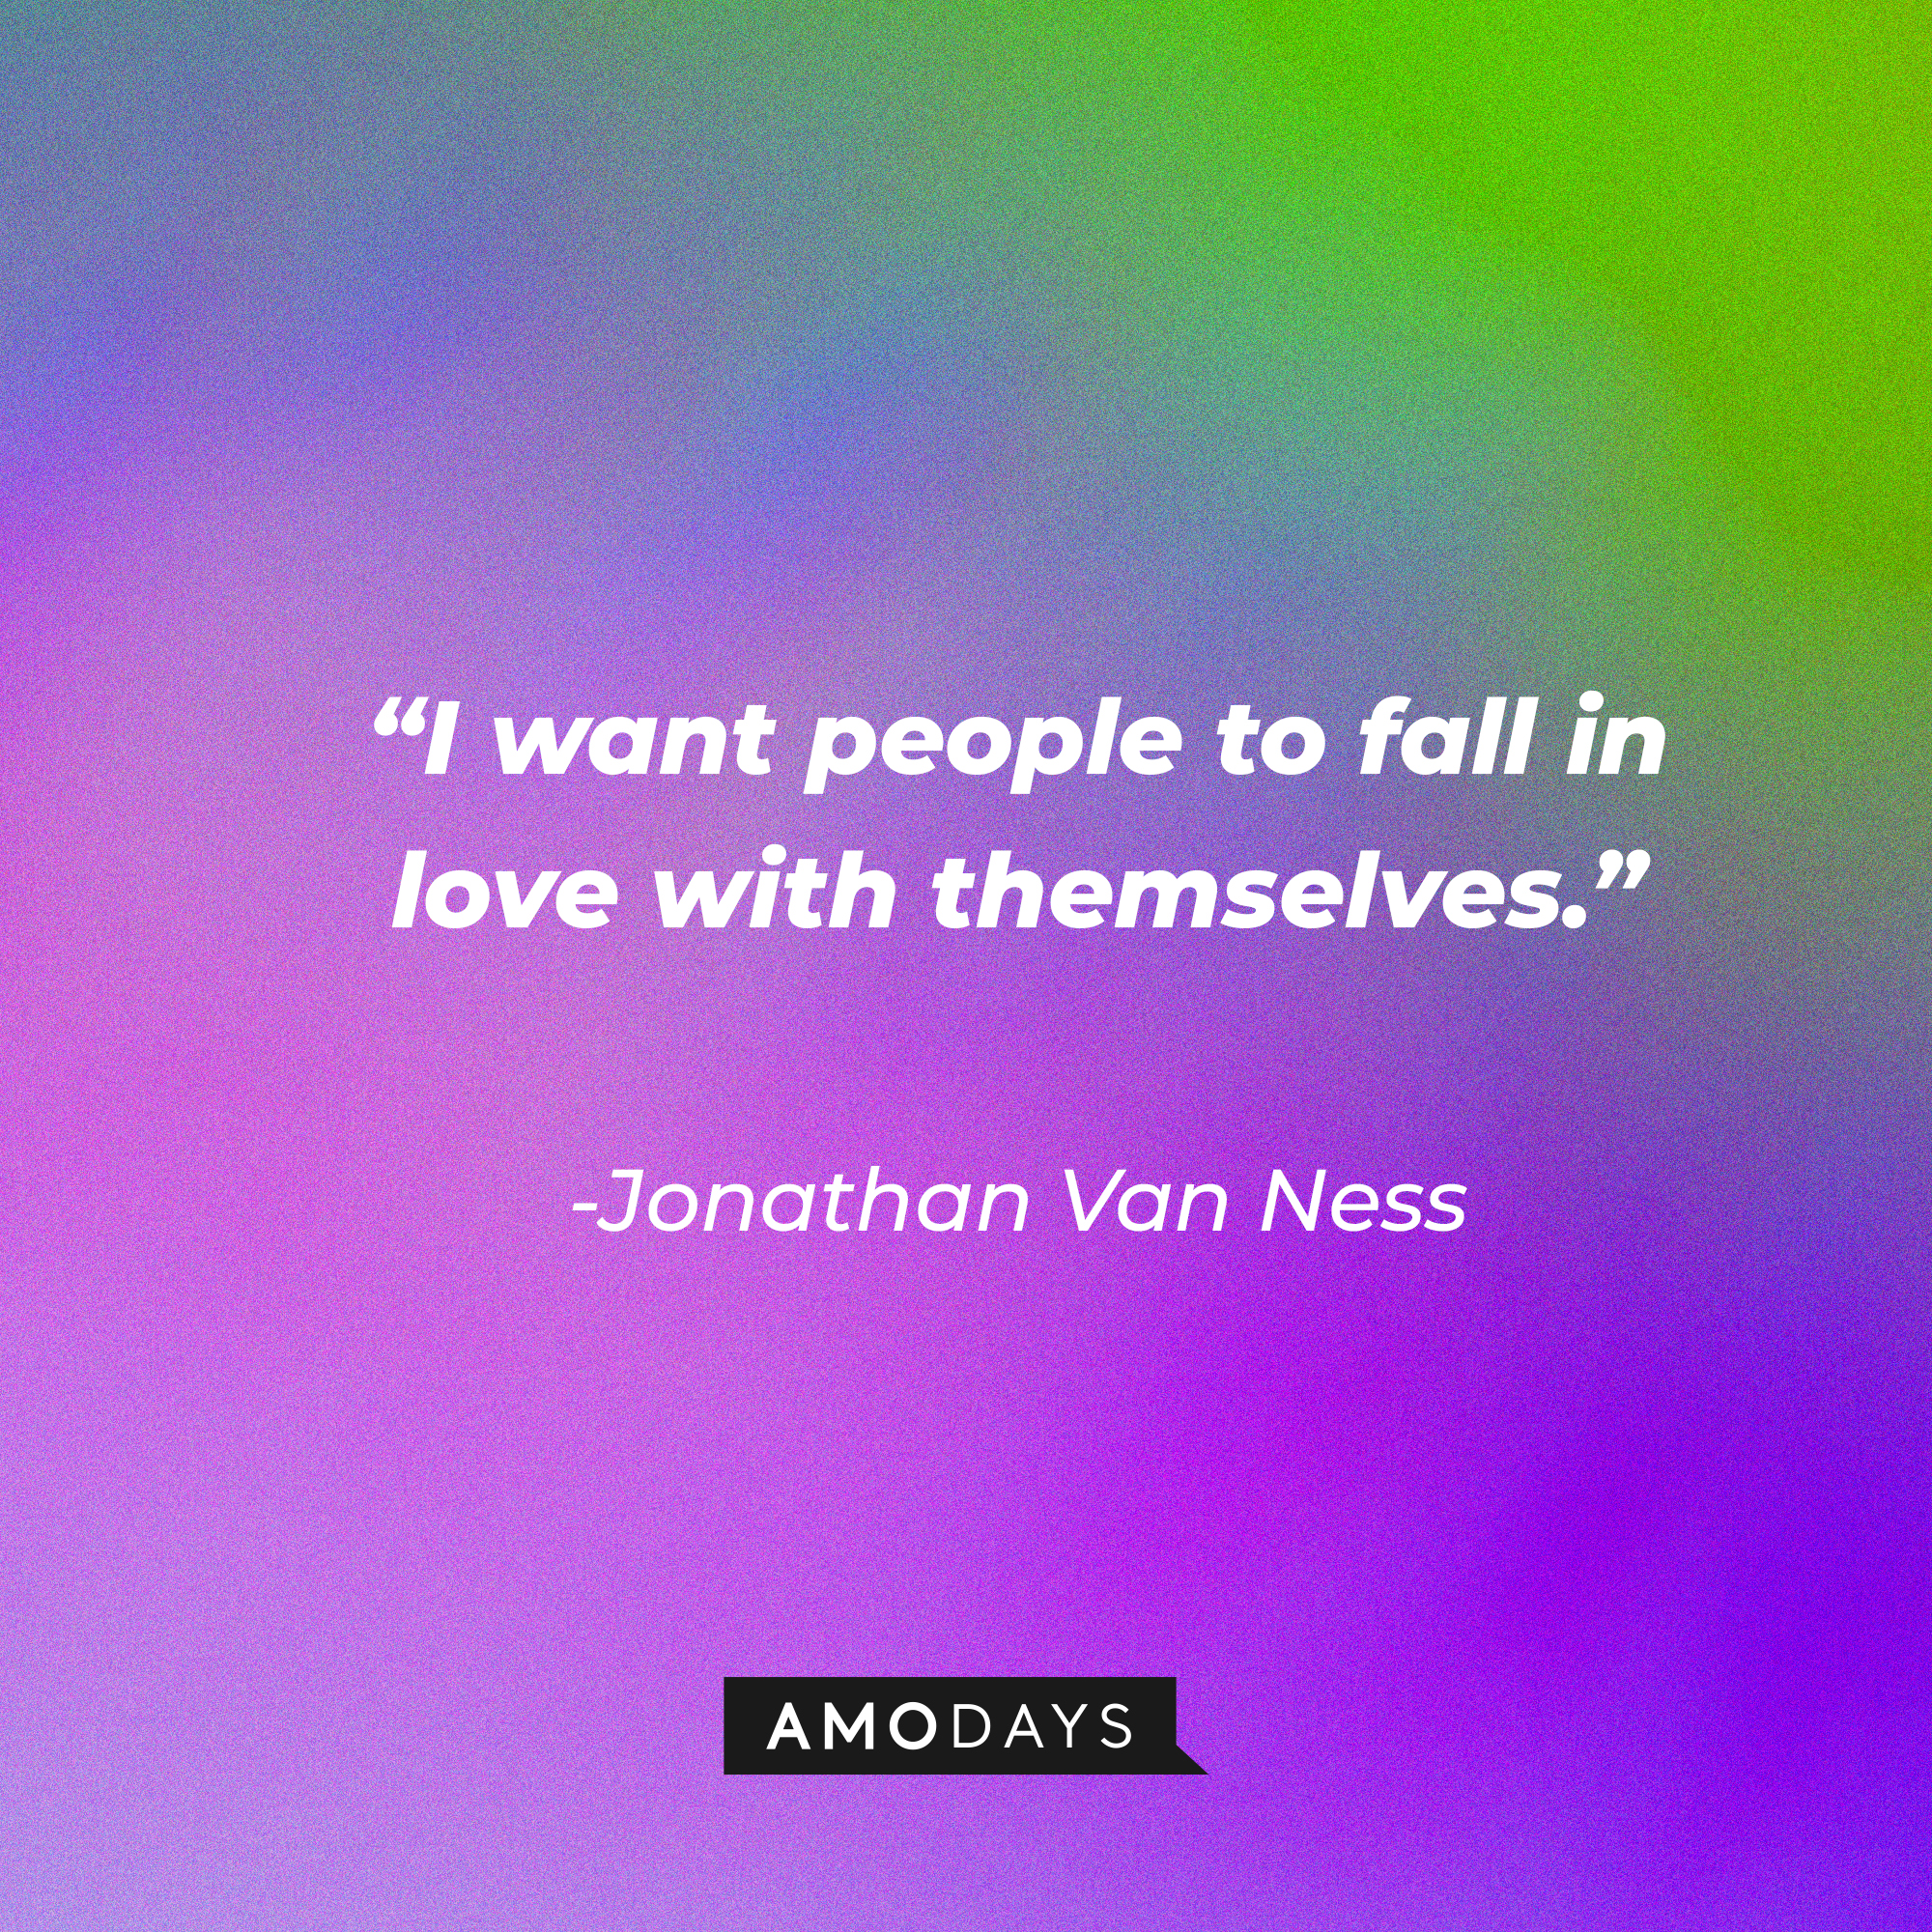 Jonathan Van Ness’s quote:  “I want people to fall in love with themselves.” | Source: AmoDays